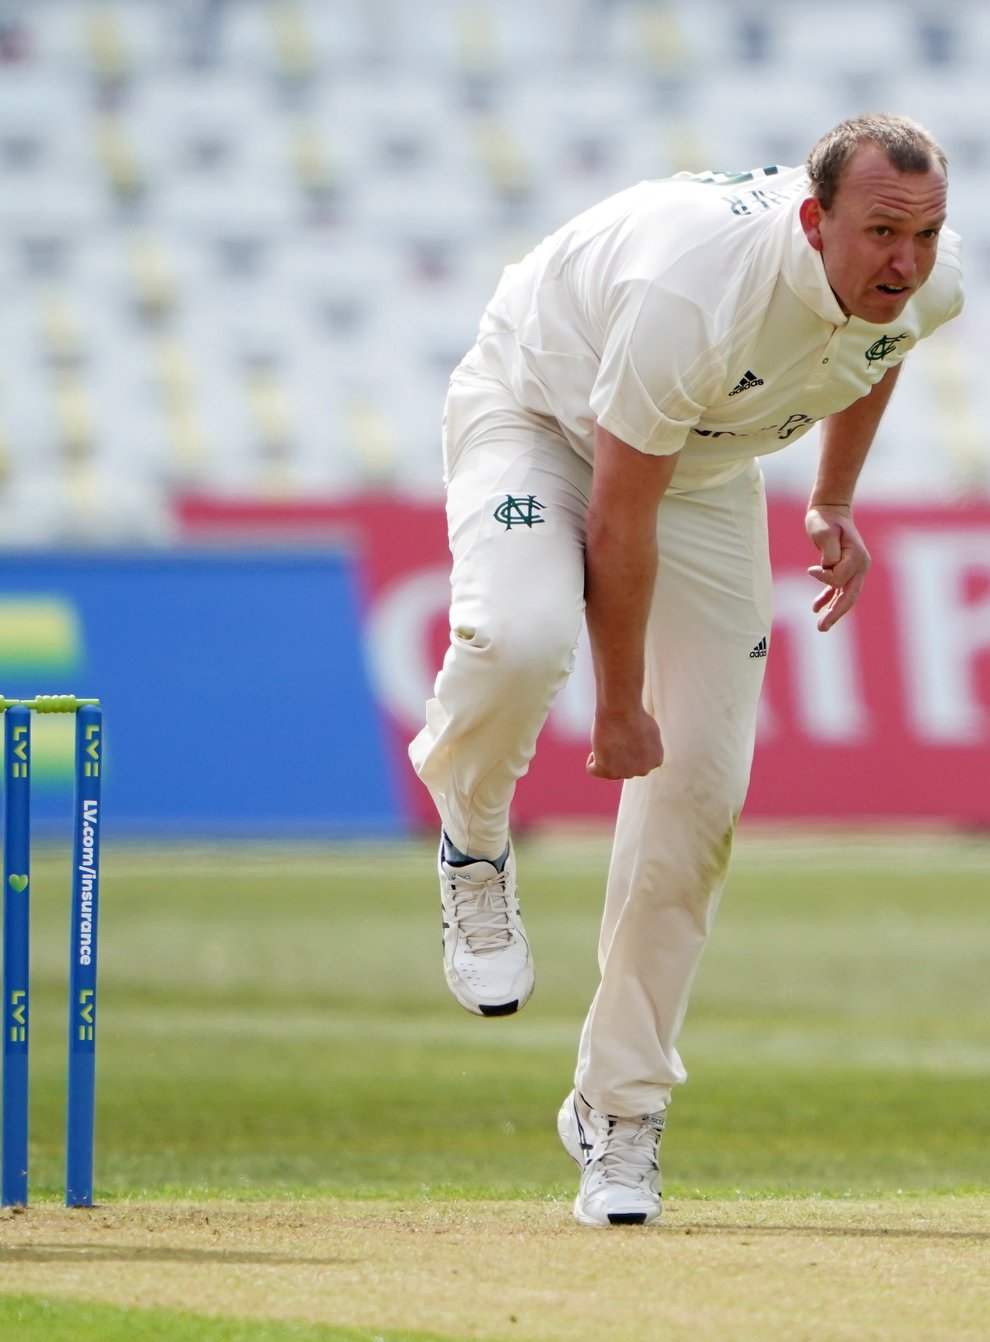 Luke Fletcher claimed five wickets as Nottinghamshire beat Derbyshire in the LV= Insurance County Championship